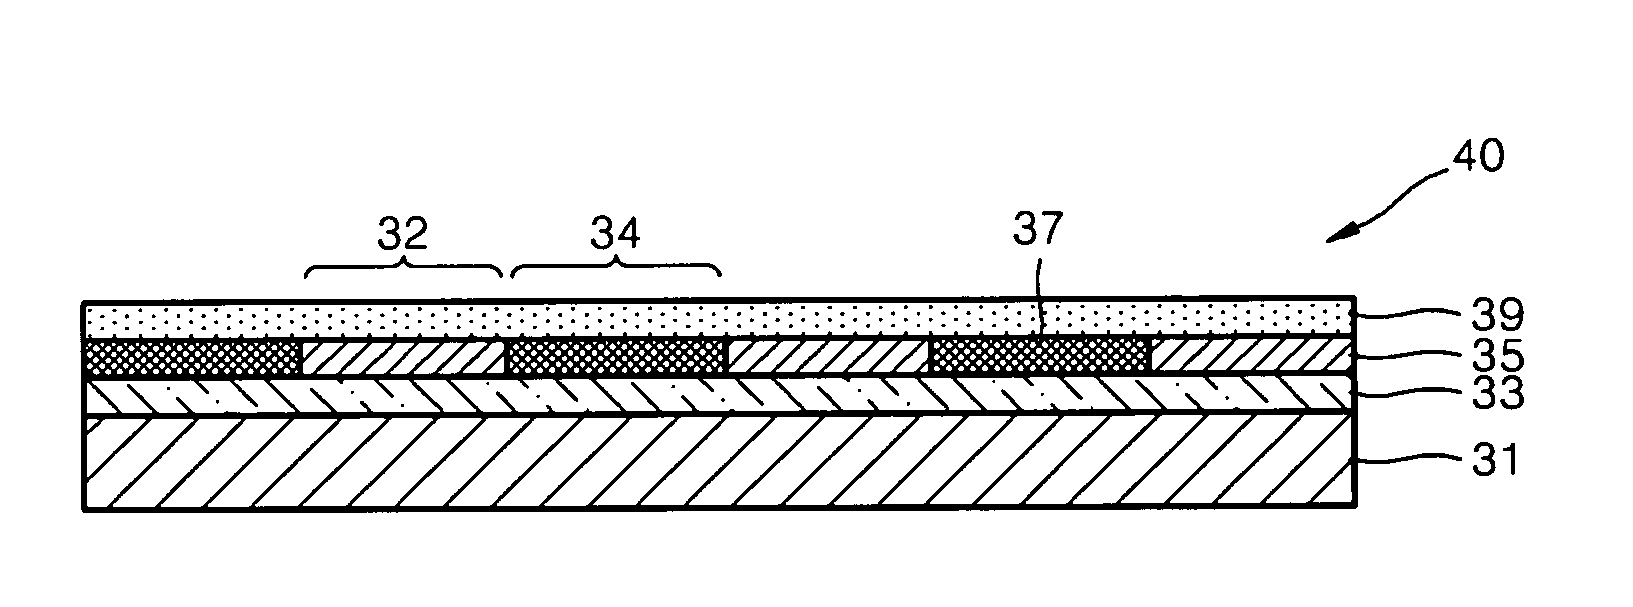 Magnetic tracks, information storage devices using magnetic domain wall movement, and methods of manufacturing the same